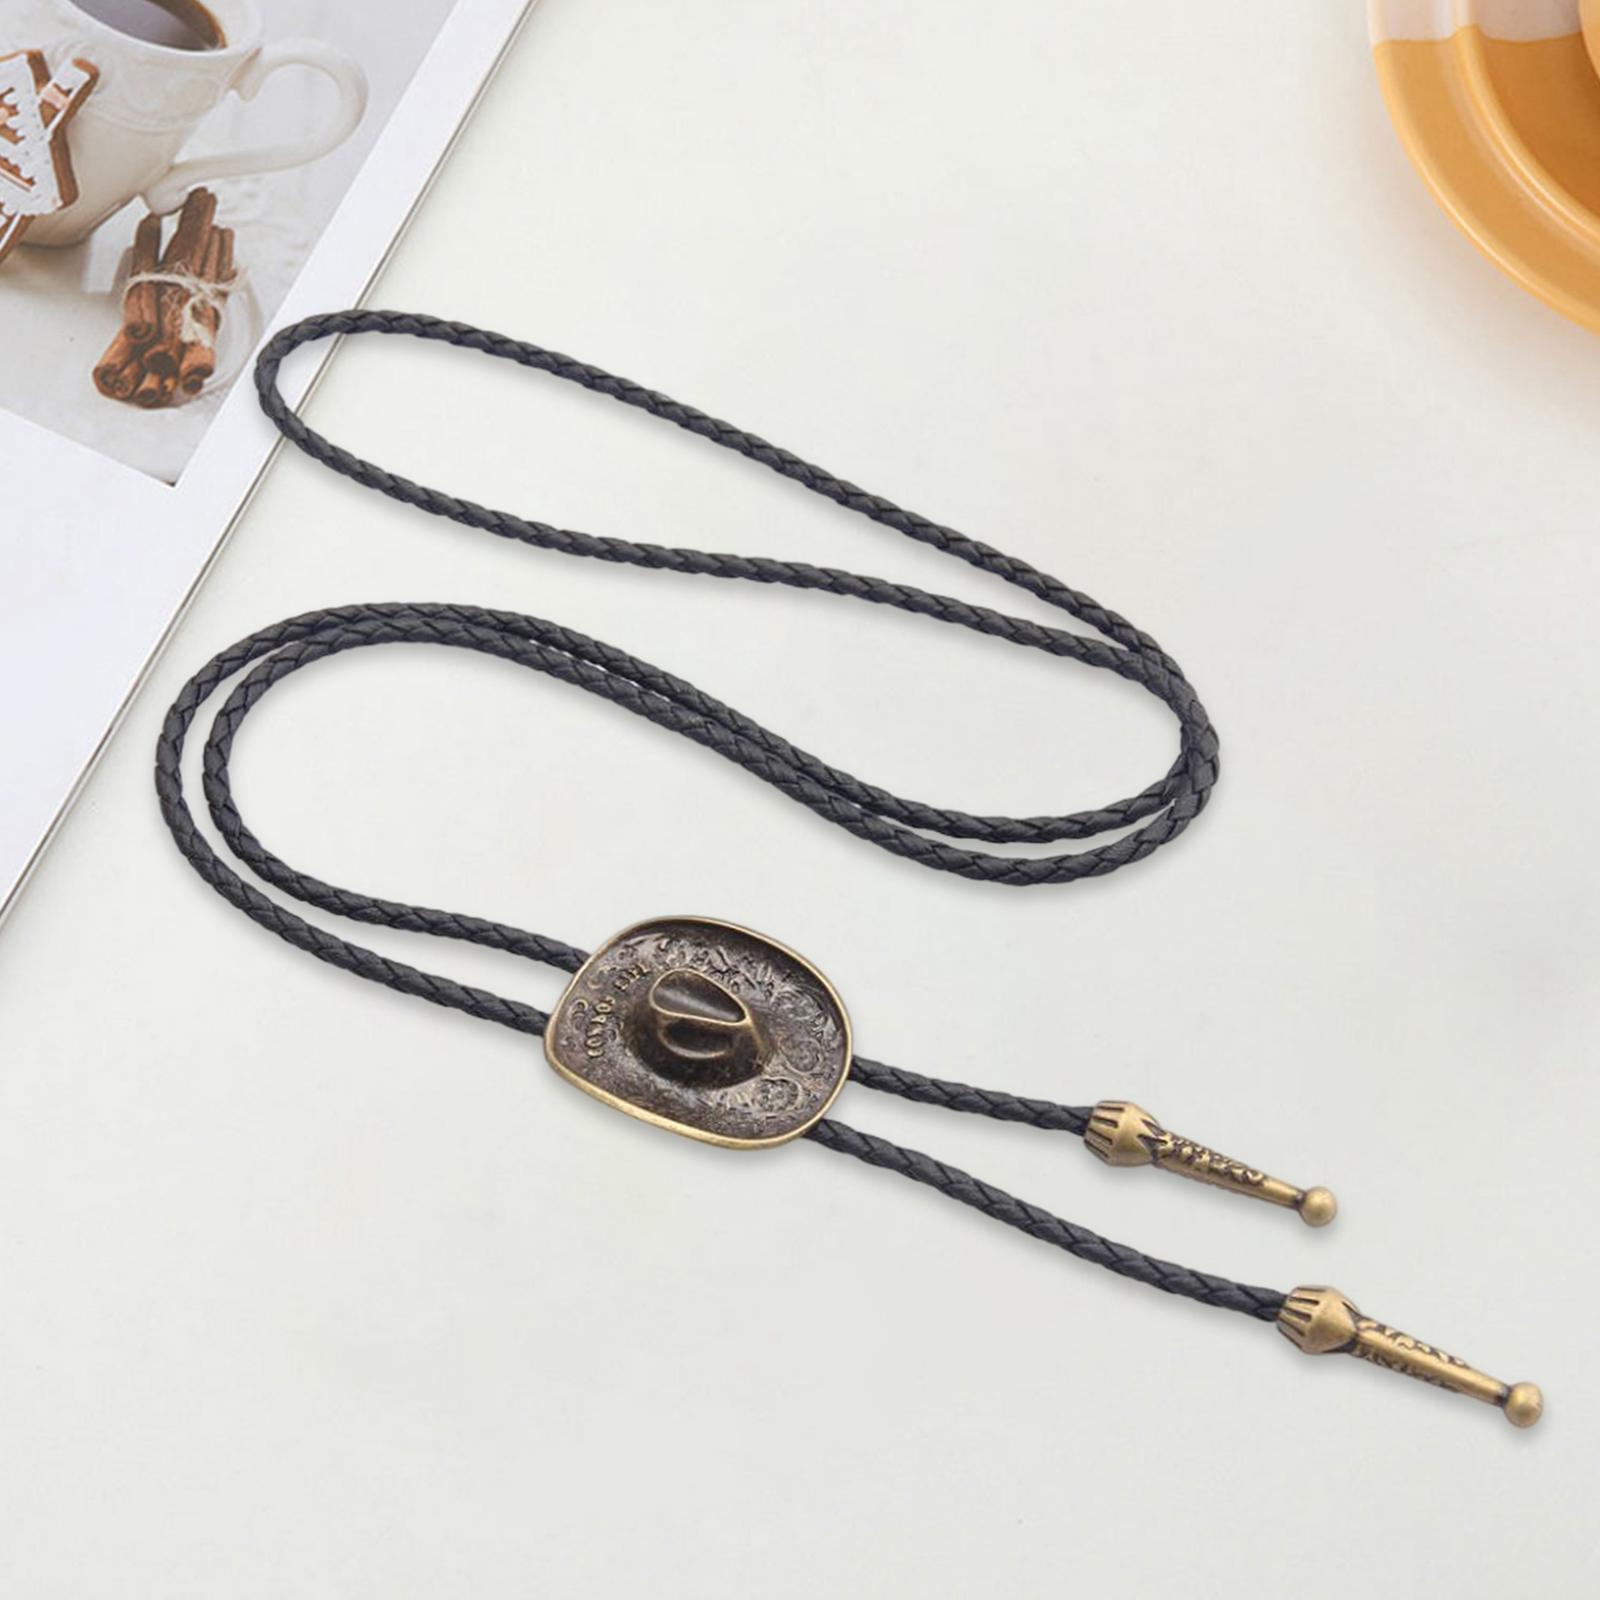 Western Cowboy Hat Bolo Tie Vintage Costume Accessories Necklace for Halloween Party